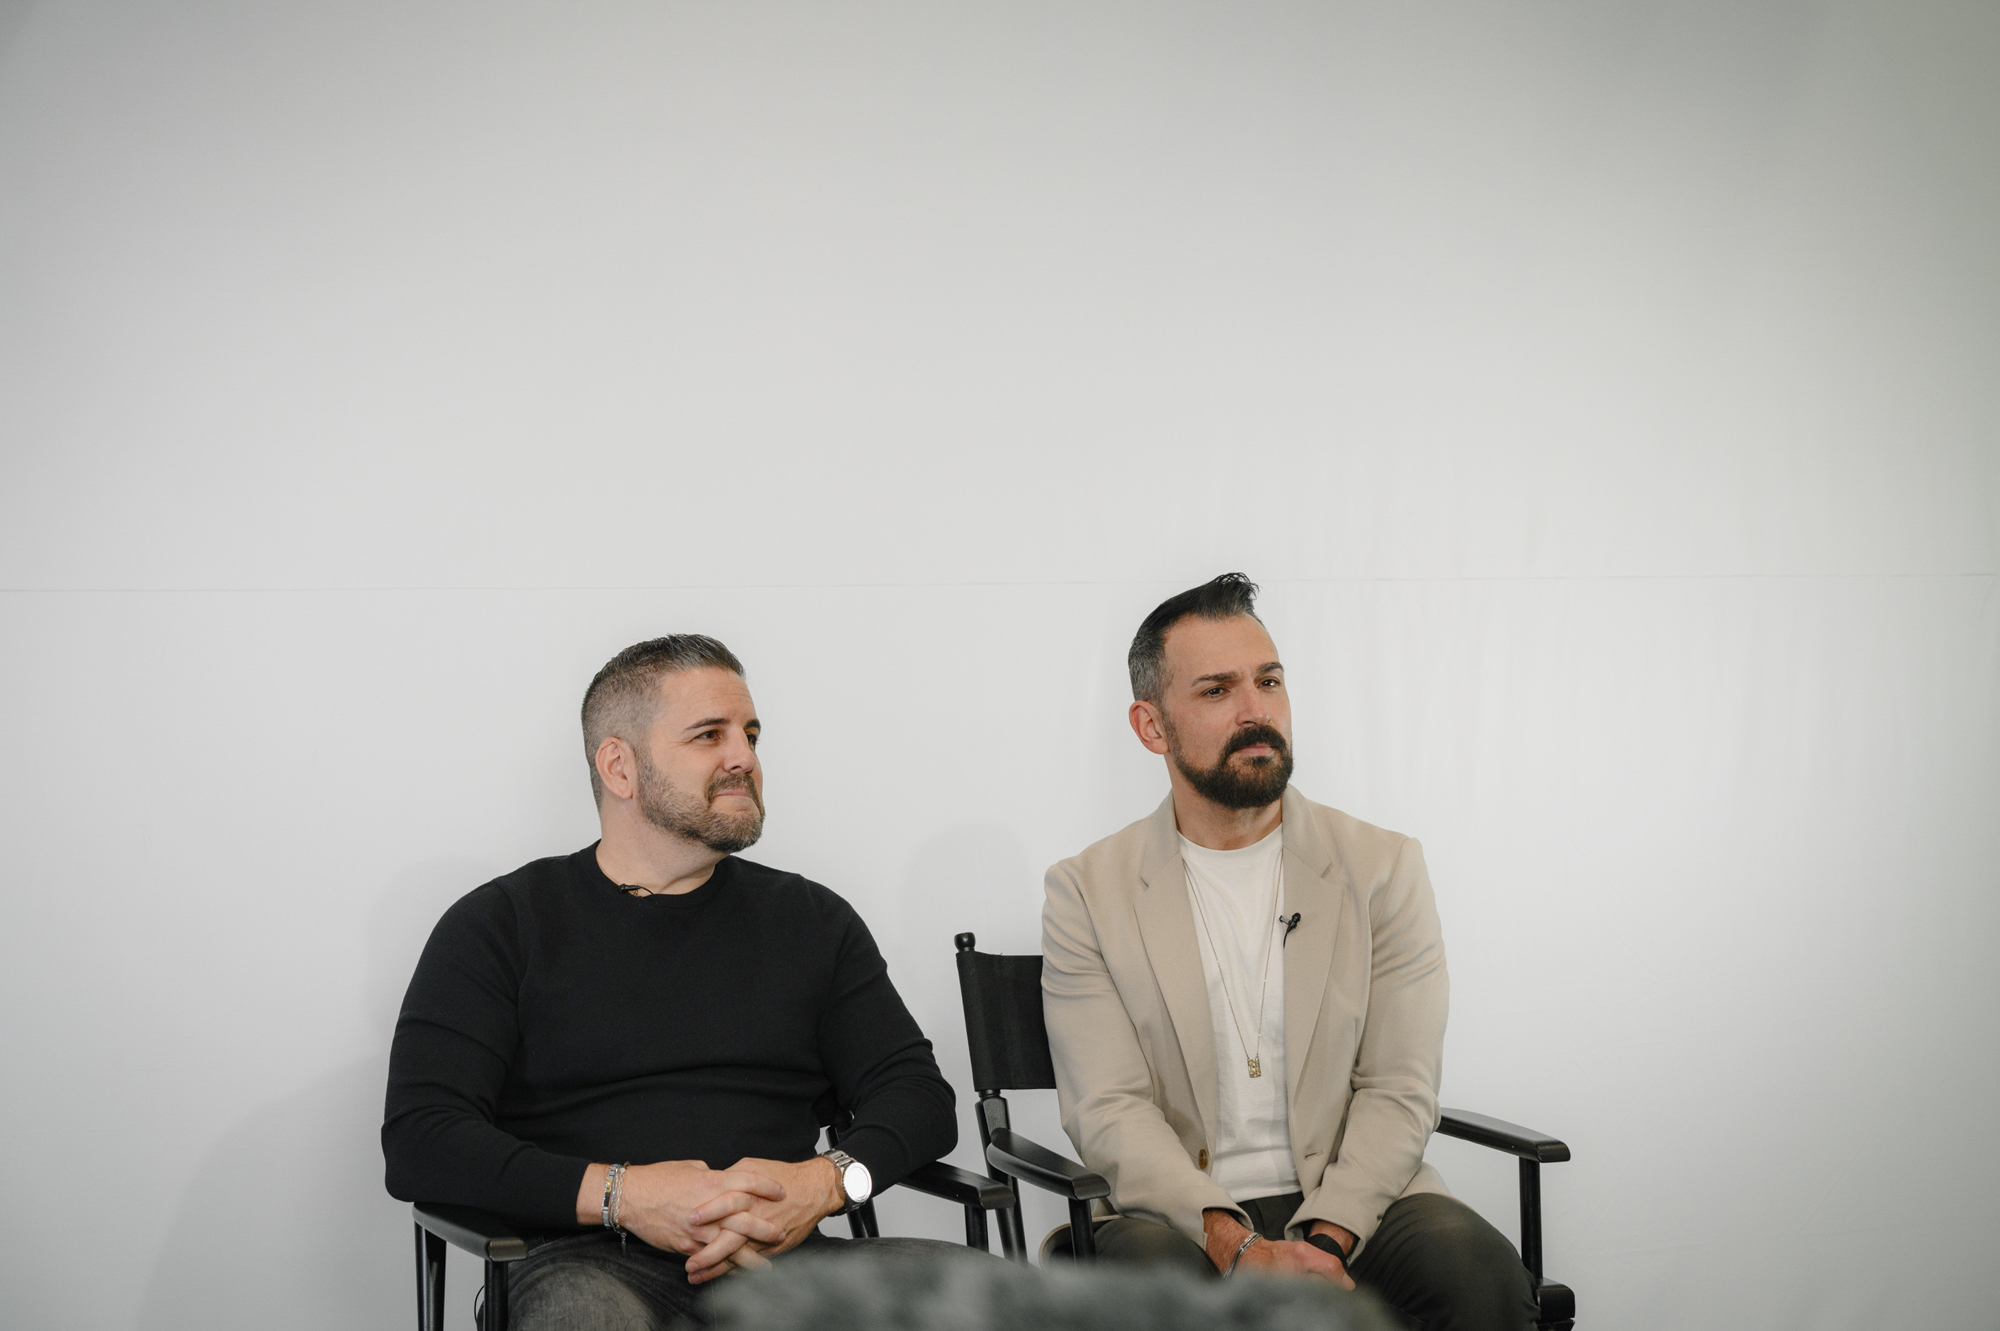 Two people sit next to each other in chairs in front of a white backdrop.